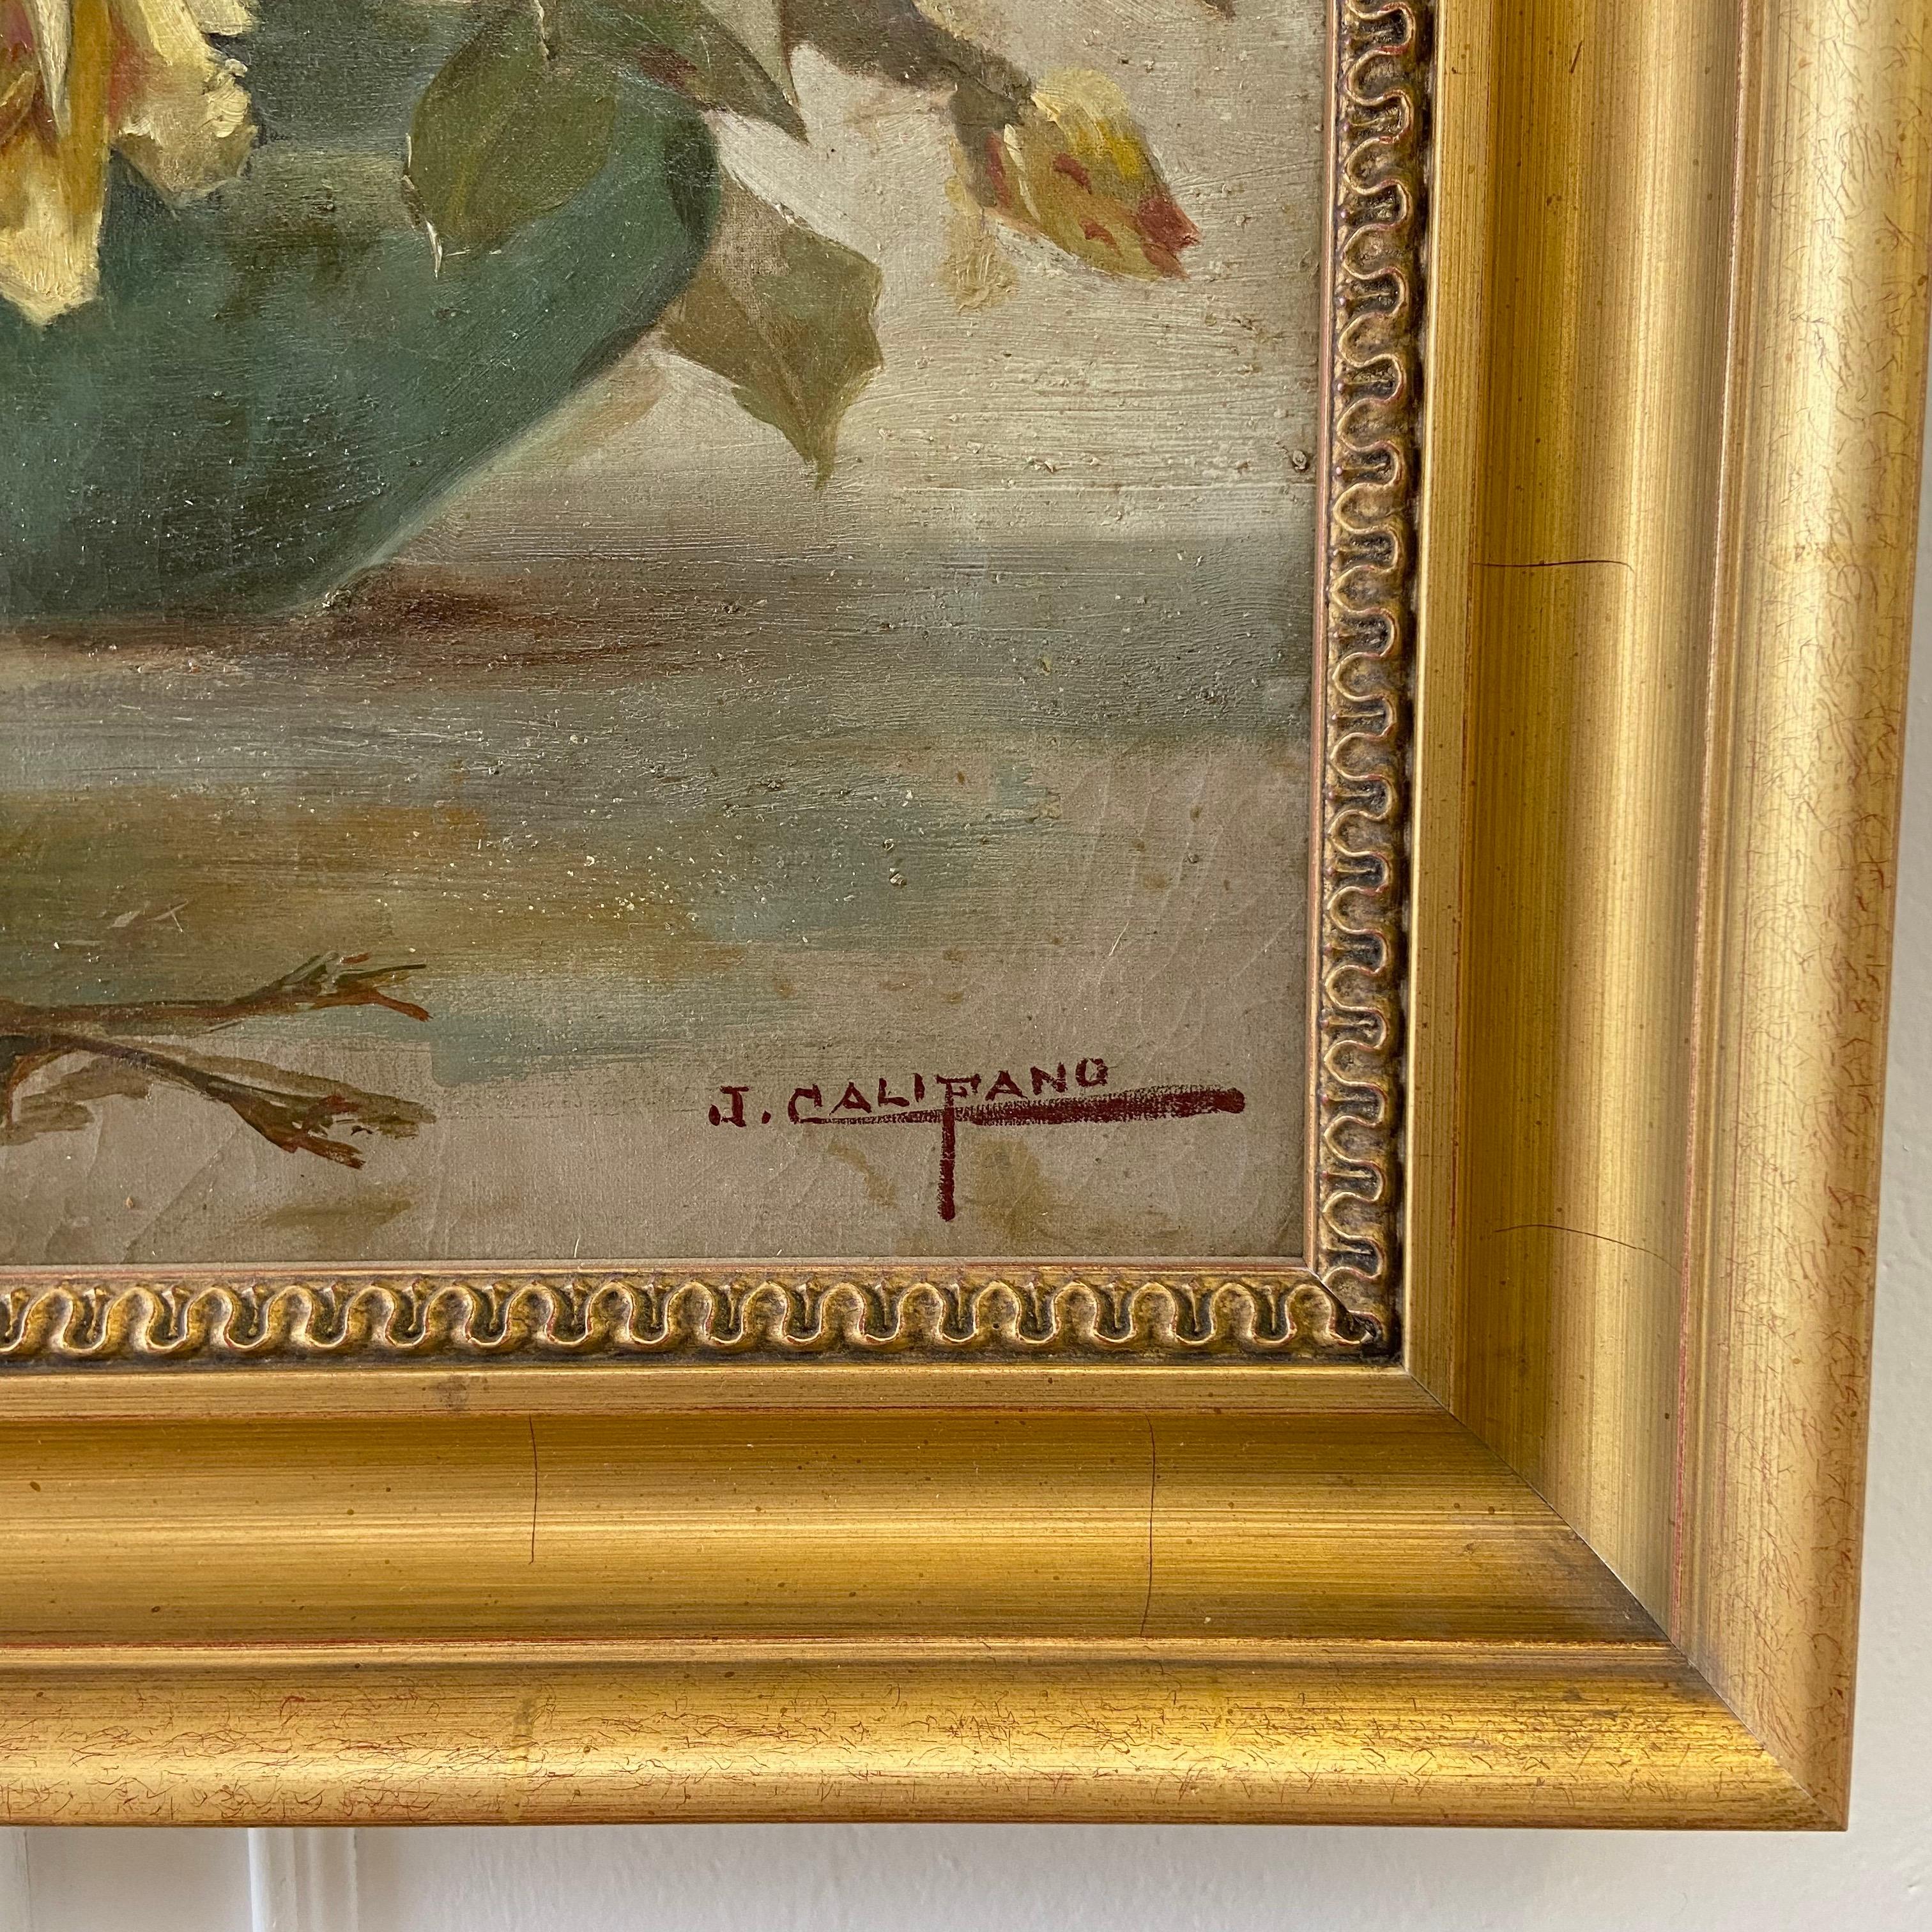 Oil painting of yellow roses in a bowl by John Califano (1864-1924)
Gilt wood frame, ready to hang
Size: 28-1/2” W x 20-1/2” H 2-1/4” D.